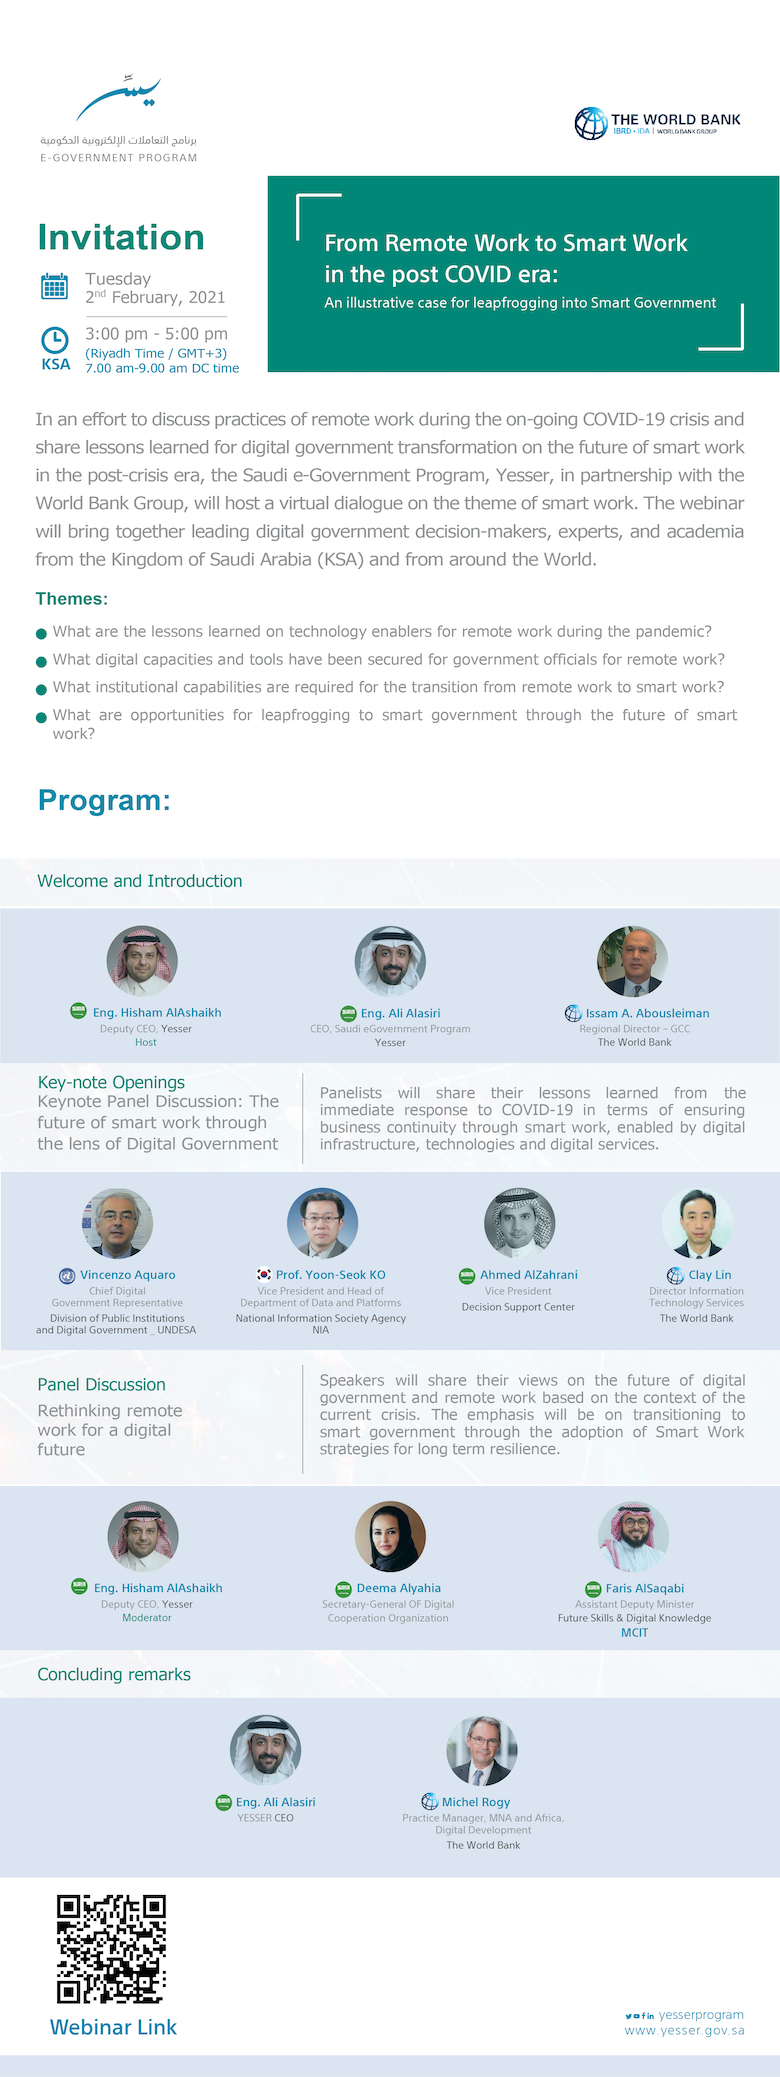 The Saudi e-Government Program (Yesser) in partnership with the World Bank Group (WBG) will host a virtual dialogue (webinar) on the theme of smart work with digital government decision-makers, experts and academia from the Kingdom of Saudi Arabia (KSA) and around the world.